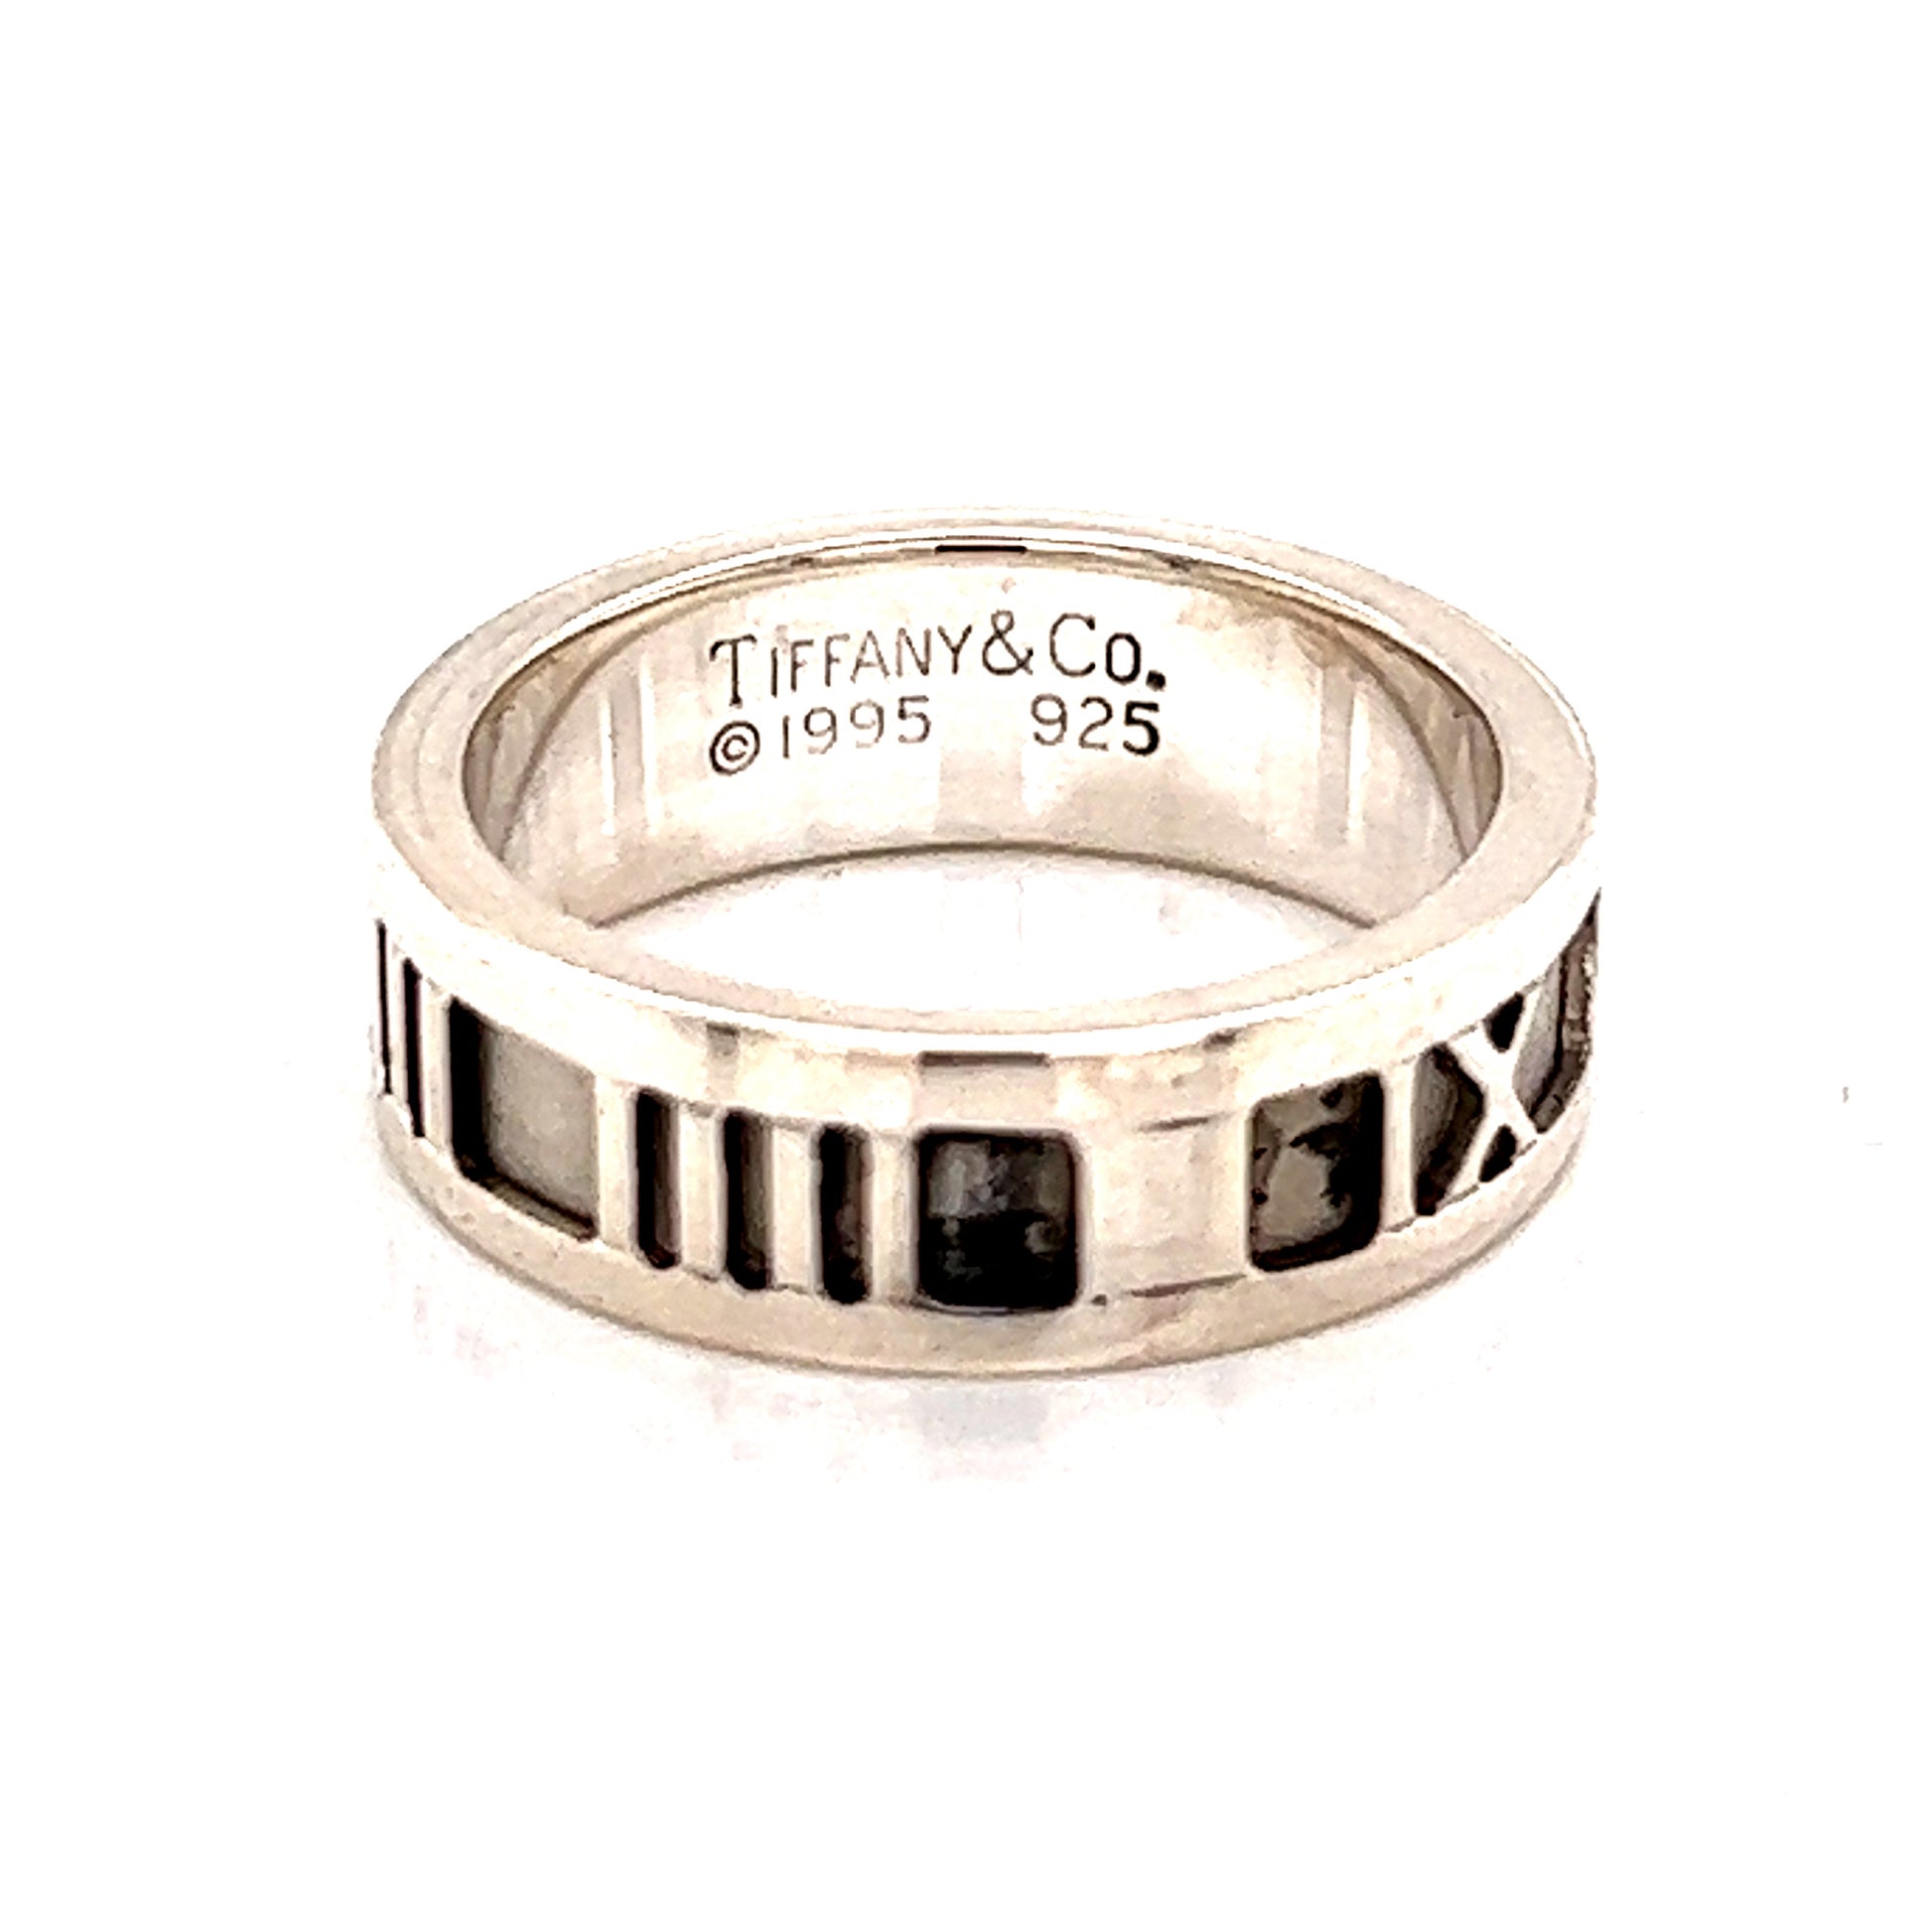 Tiffany & Co Estate Sterling Silver Ring Size 5.25, 4.9 Grams TIF181 - Certified Estate Jewelry